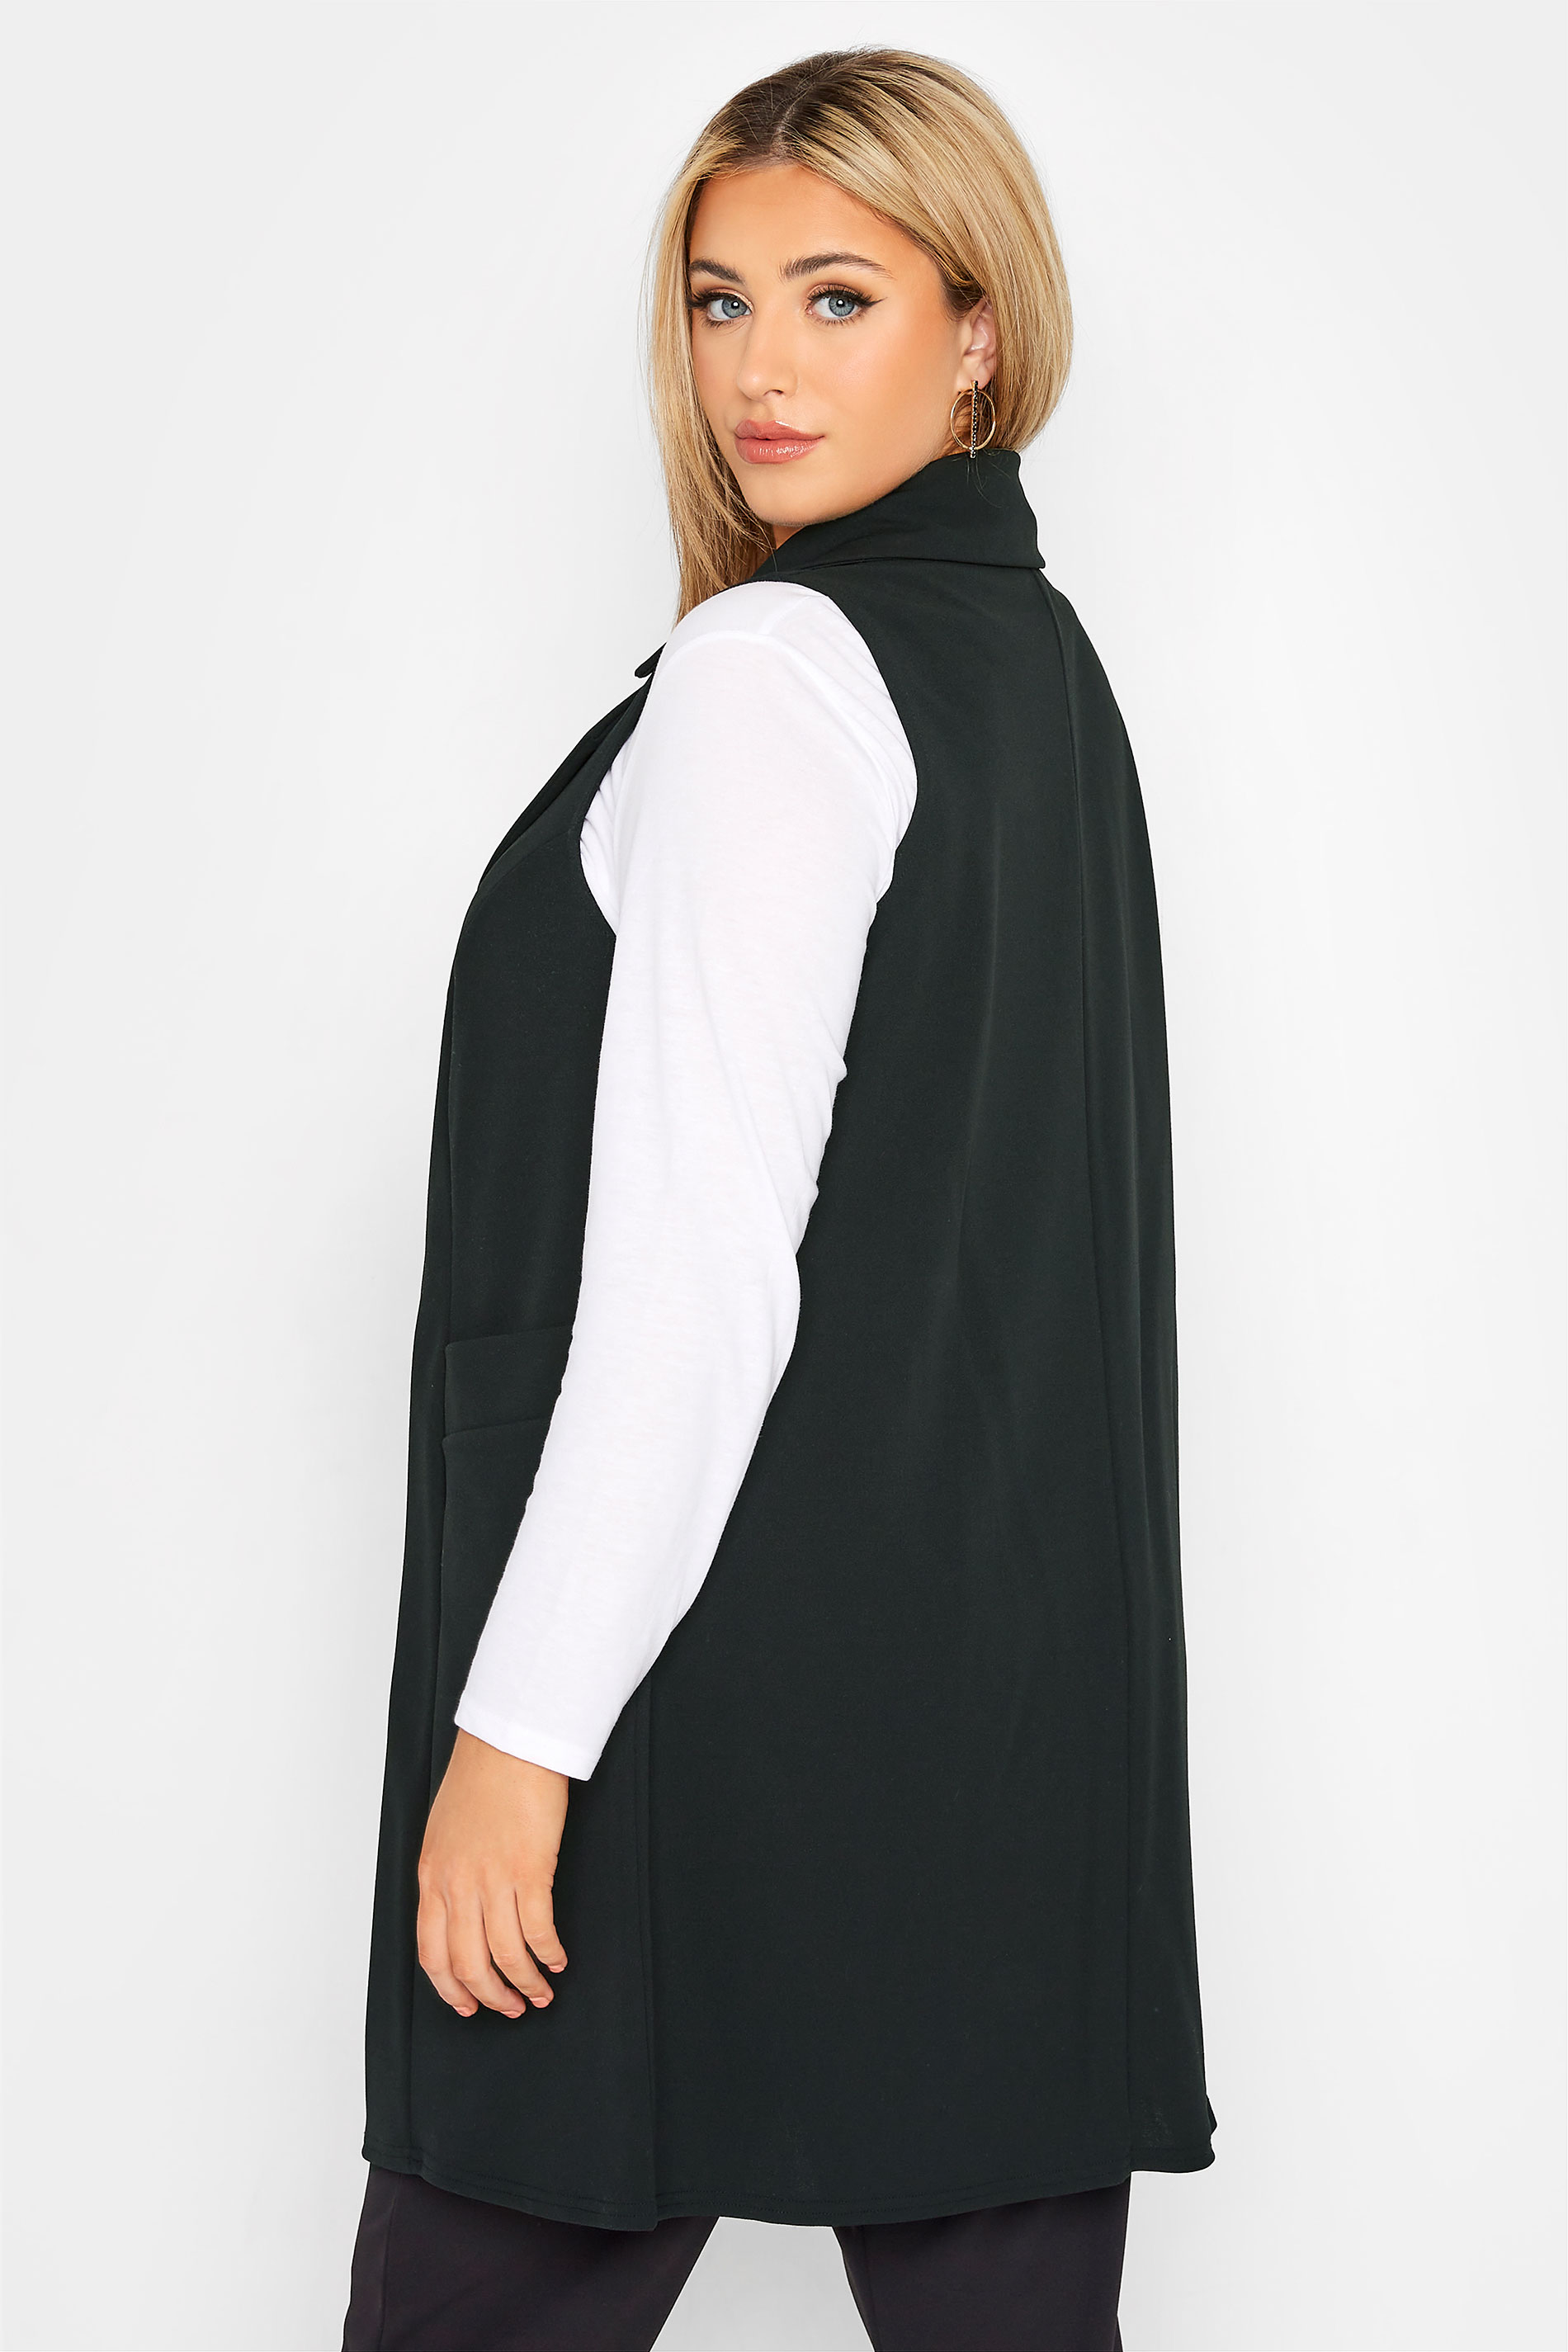 LIMITED COLLECTION Plus Size Black Button Front Sleeveless Blazer | Yours Clothing 3